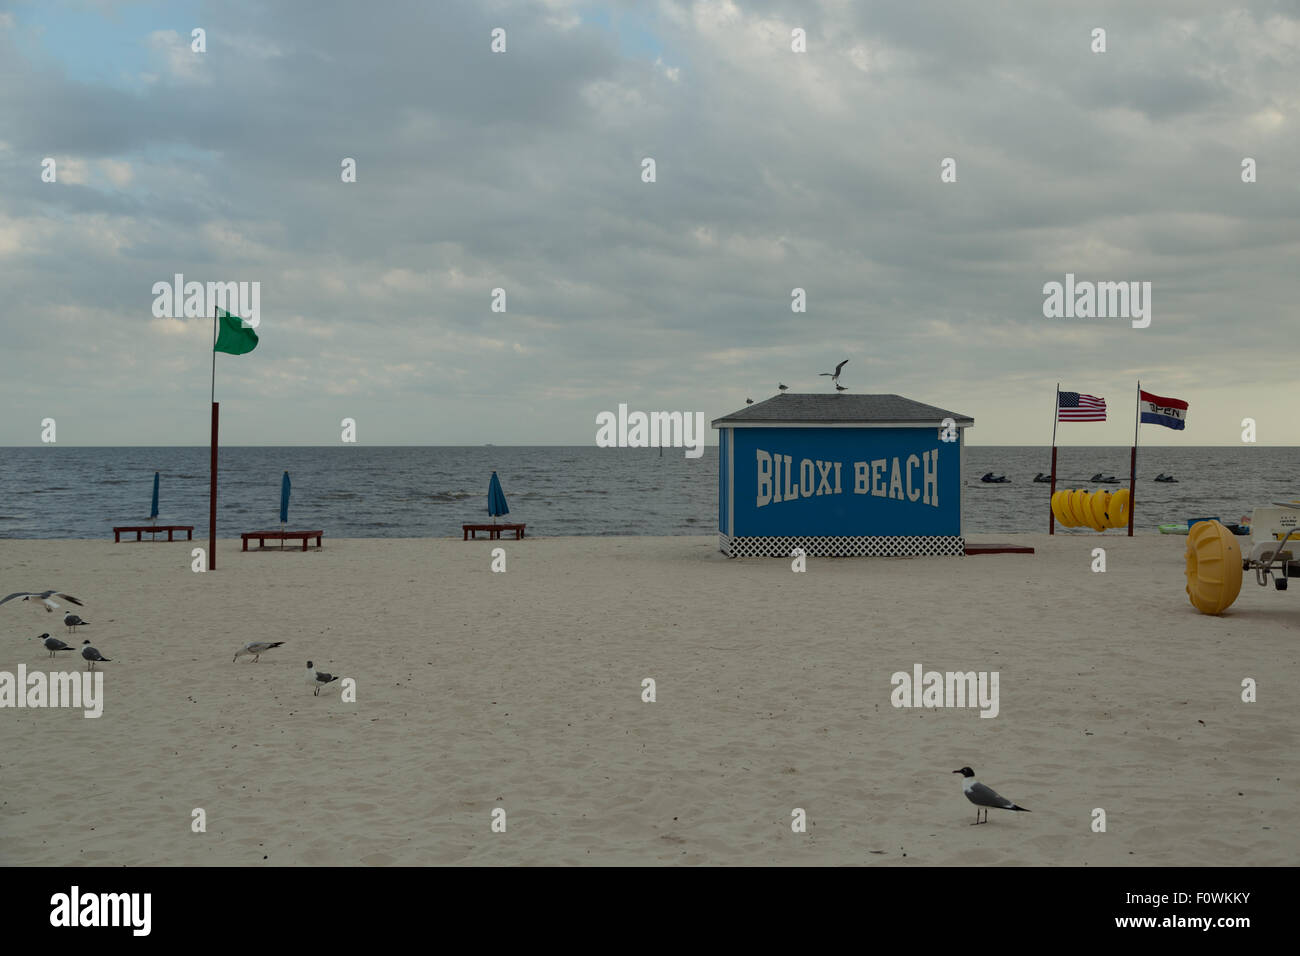 A photograph of Biloxi Beach on the Mississippi Sound in Mississippi, USA. The City of Biloxi, is a city in Harrison County, MS. Stock Photo